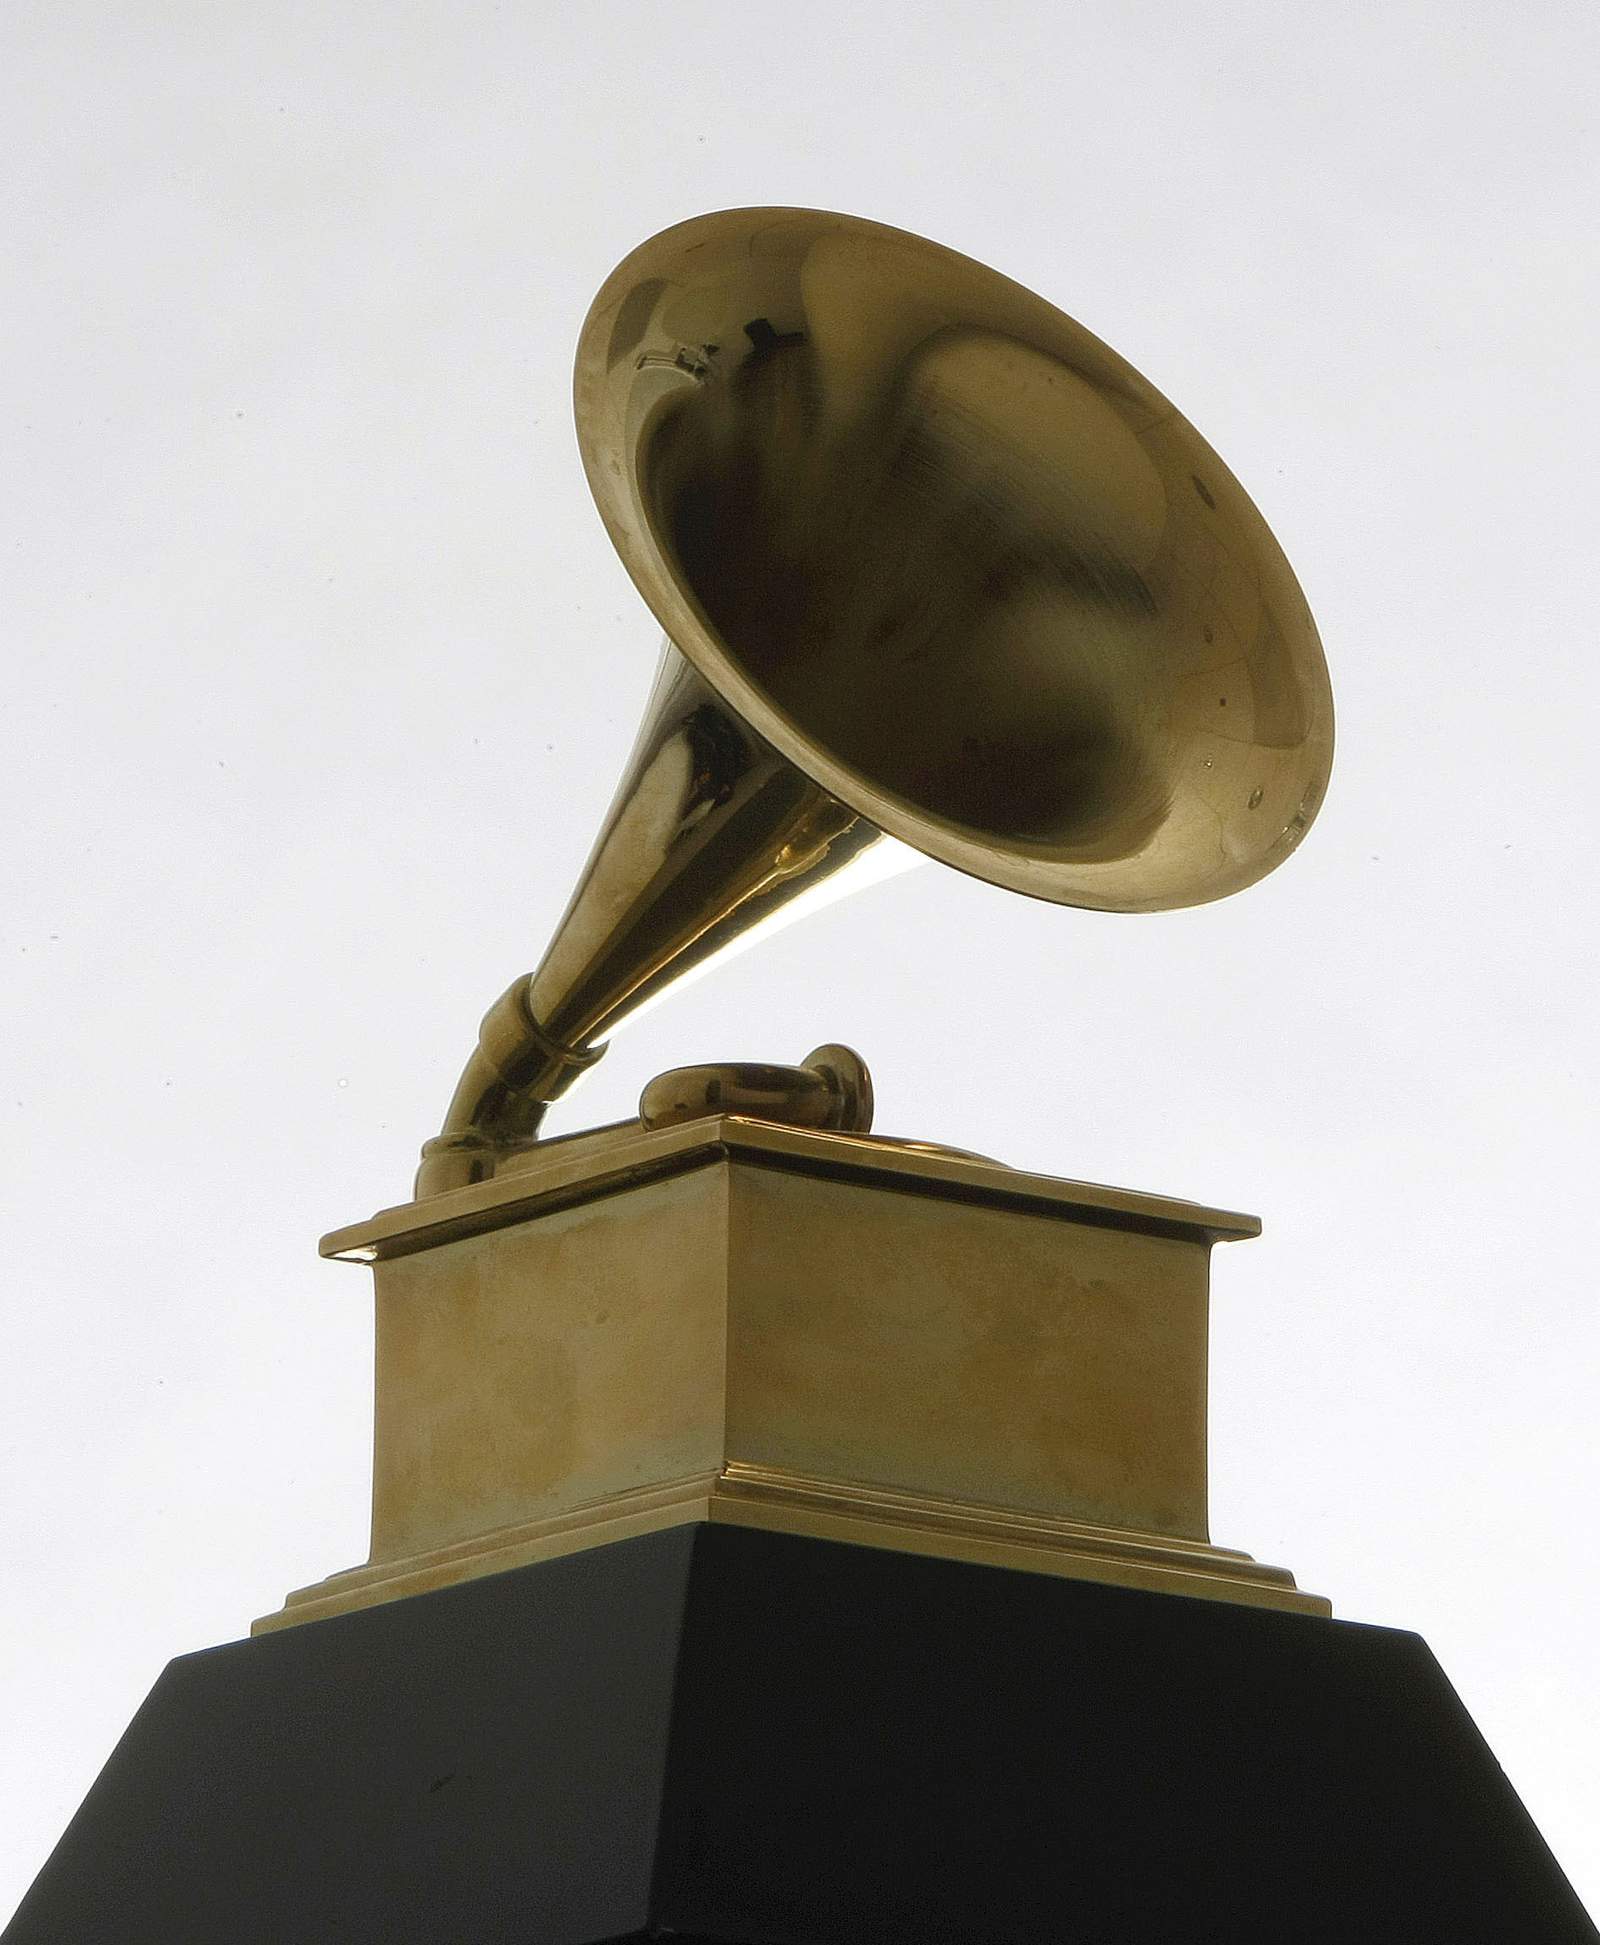 Grammys make awards changes, address conflicts of interest